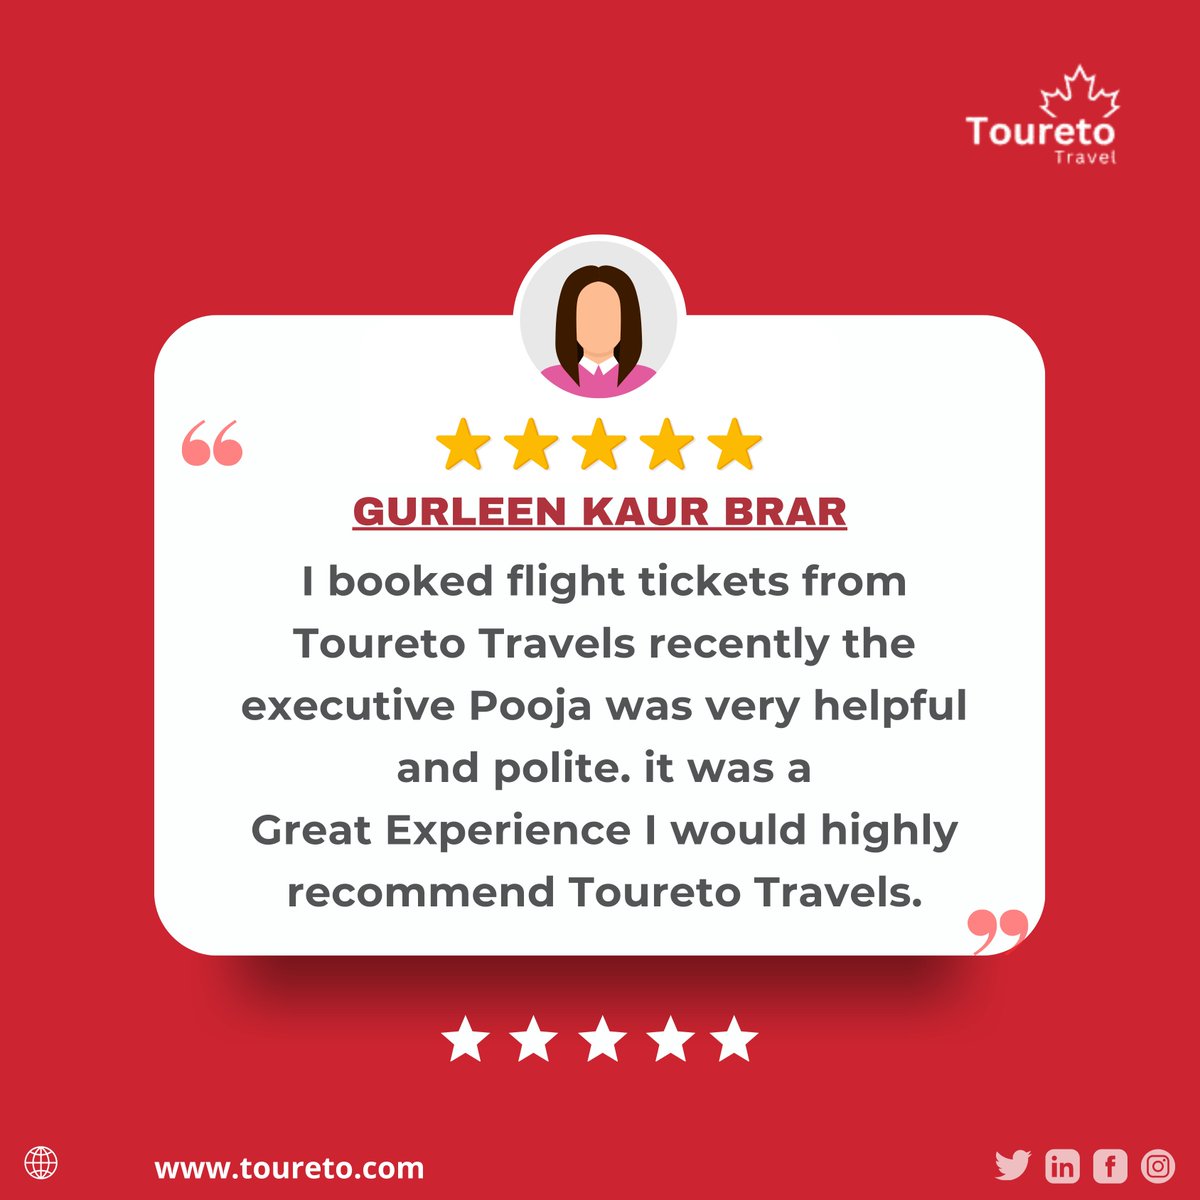 Thank you to our valued Toureto Travel customer for sharing your wonderful experience with us. Your satisfaction drives us to continually deliver exceptional service.#CustomerReview #HappyCustomer #TouretoTravel #TravelExperience #SatisfiedCustomer #TravelGoals #DreamVacation